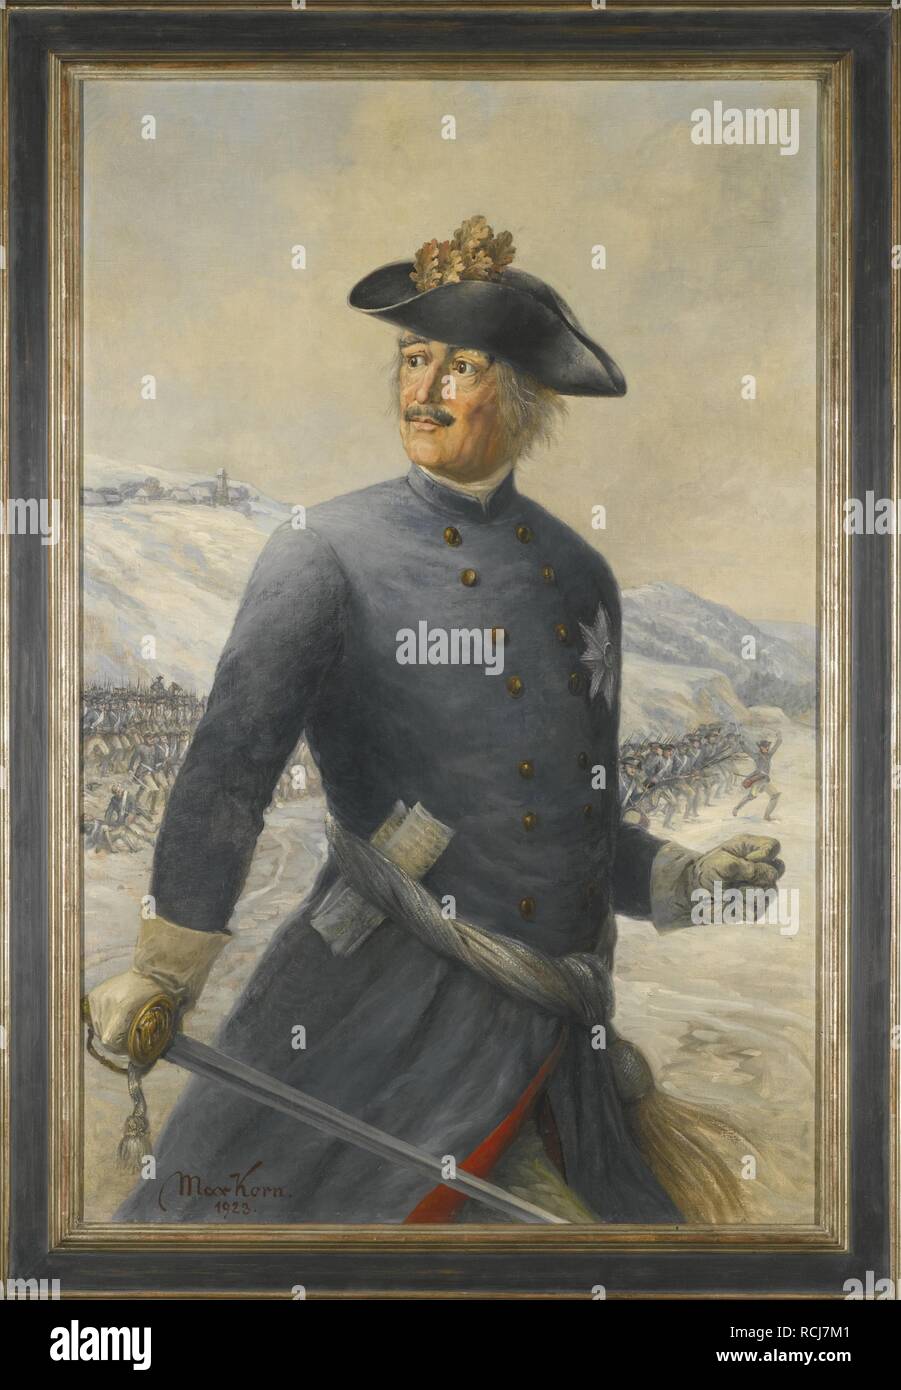 Leopold I, Prince of Anhalt-Dessau (1676-1747), Generalfeldmarschall in the Prussian Army. Museum: PRIVATE COLLECTION. Author: Korn, Max. Stock Photo